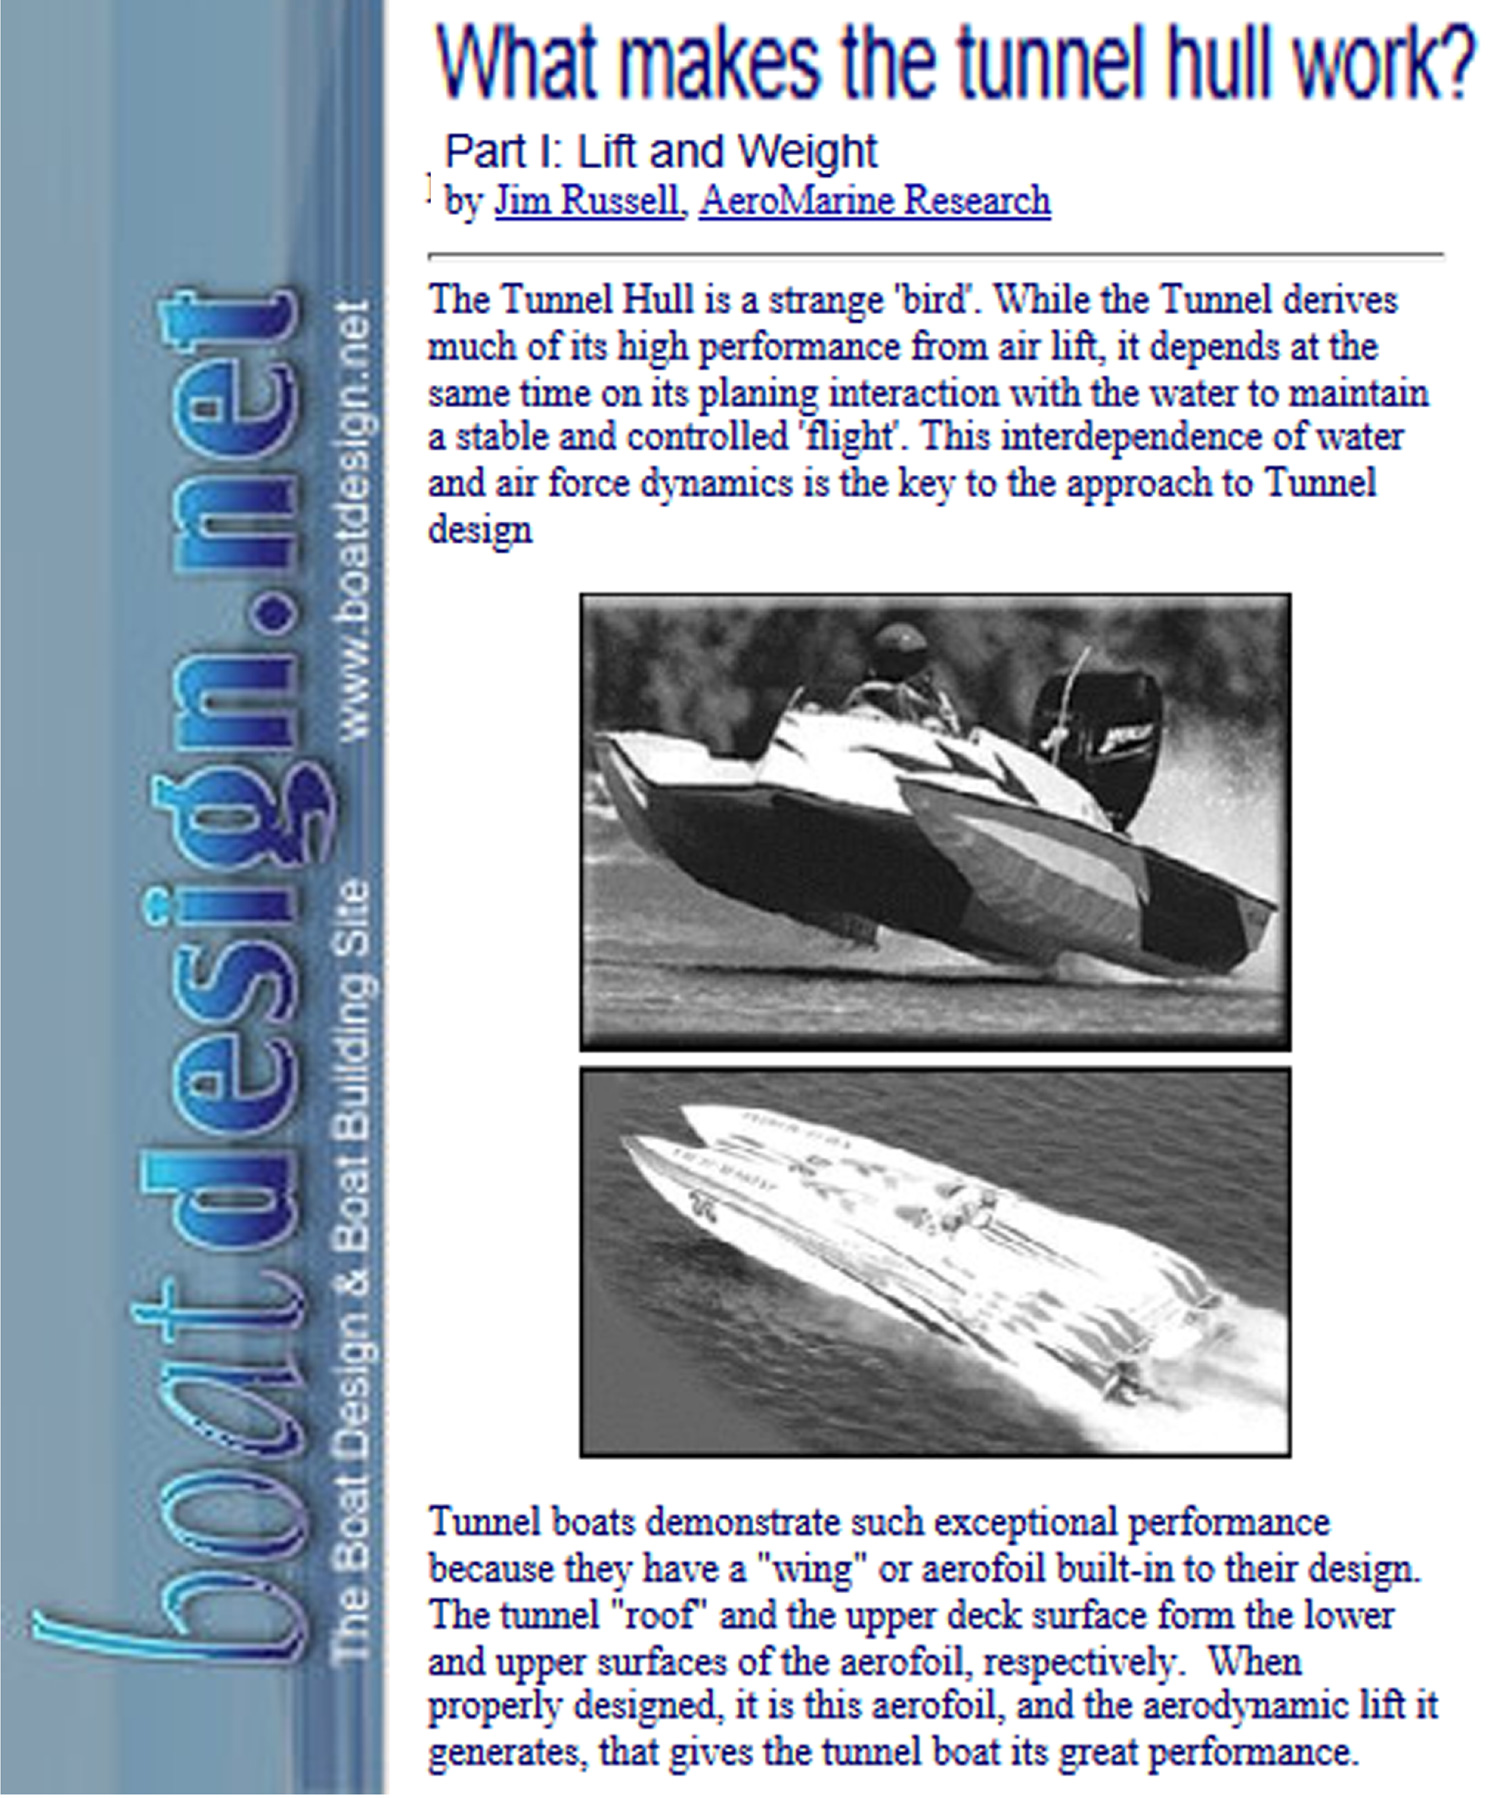 BoatDesign.net - May 2002, by Jim Russell